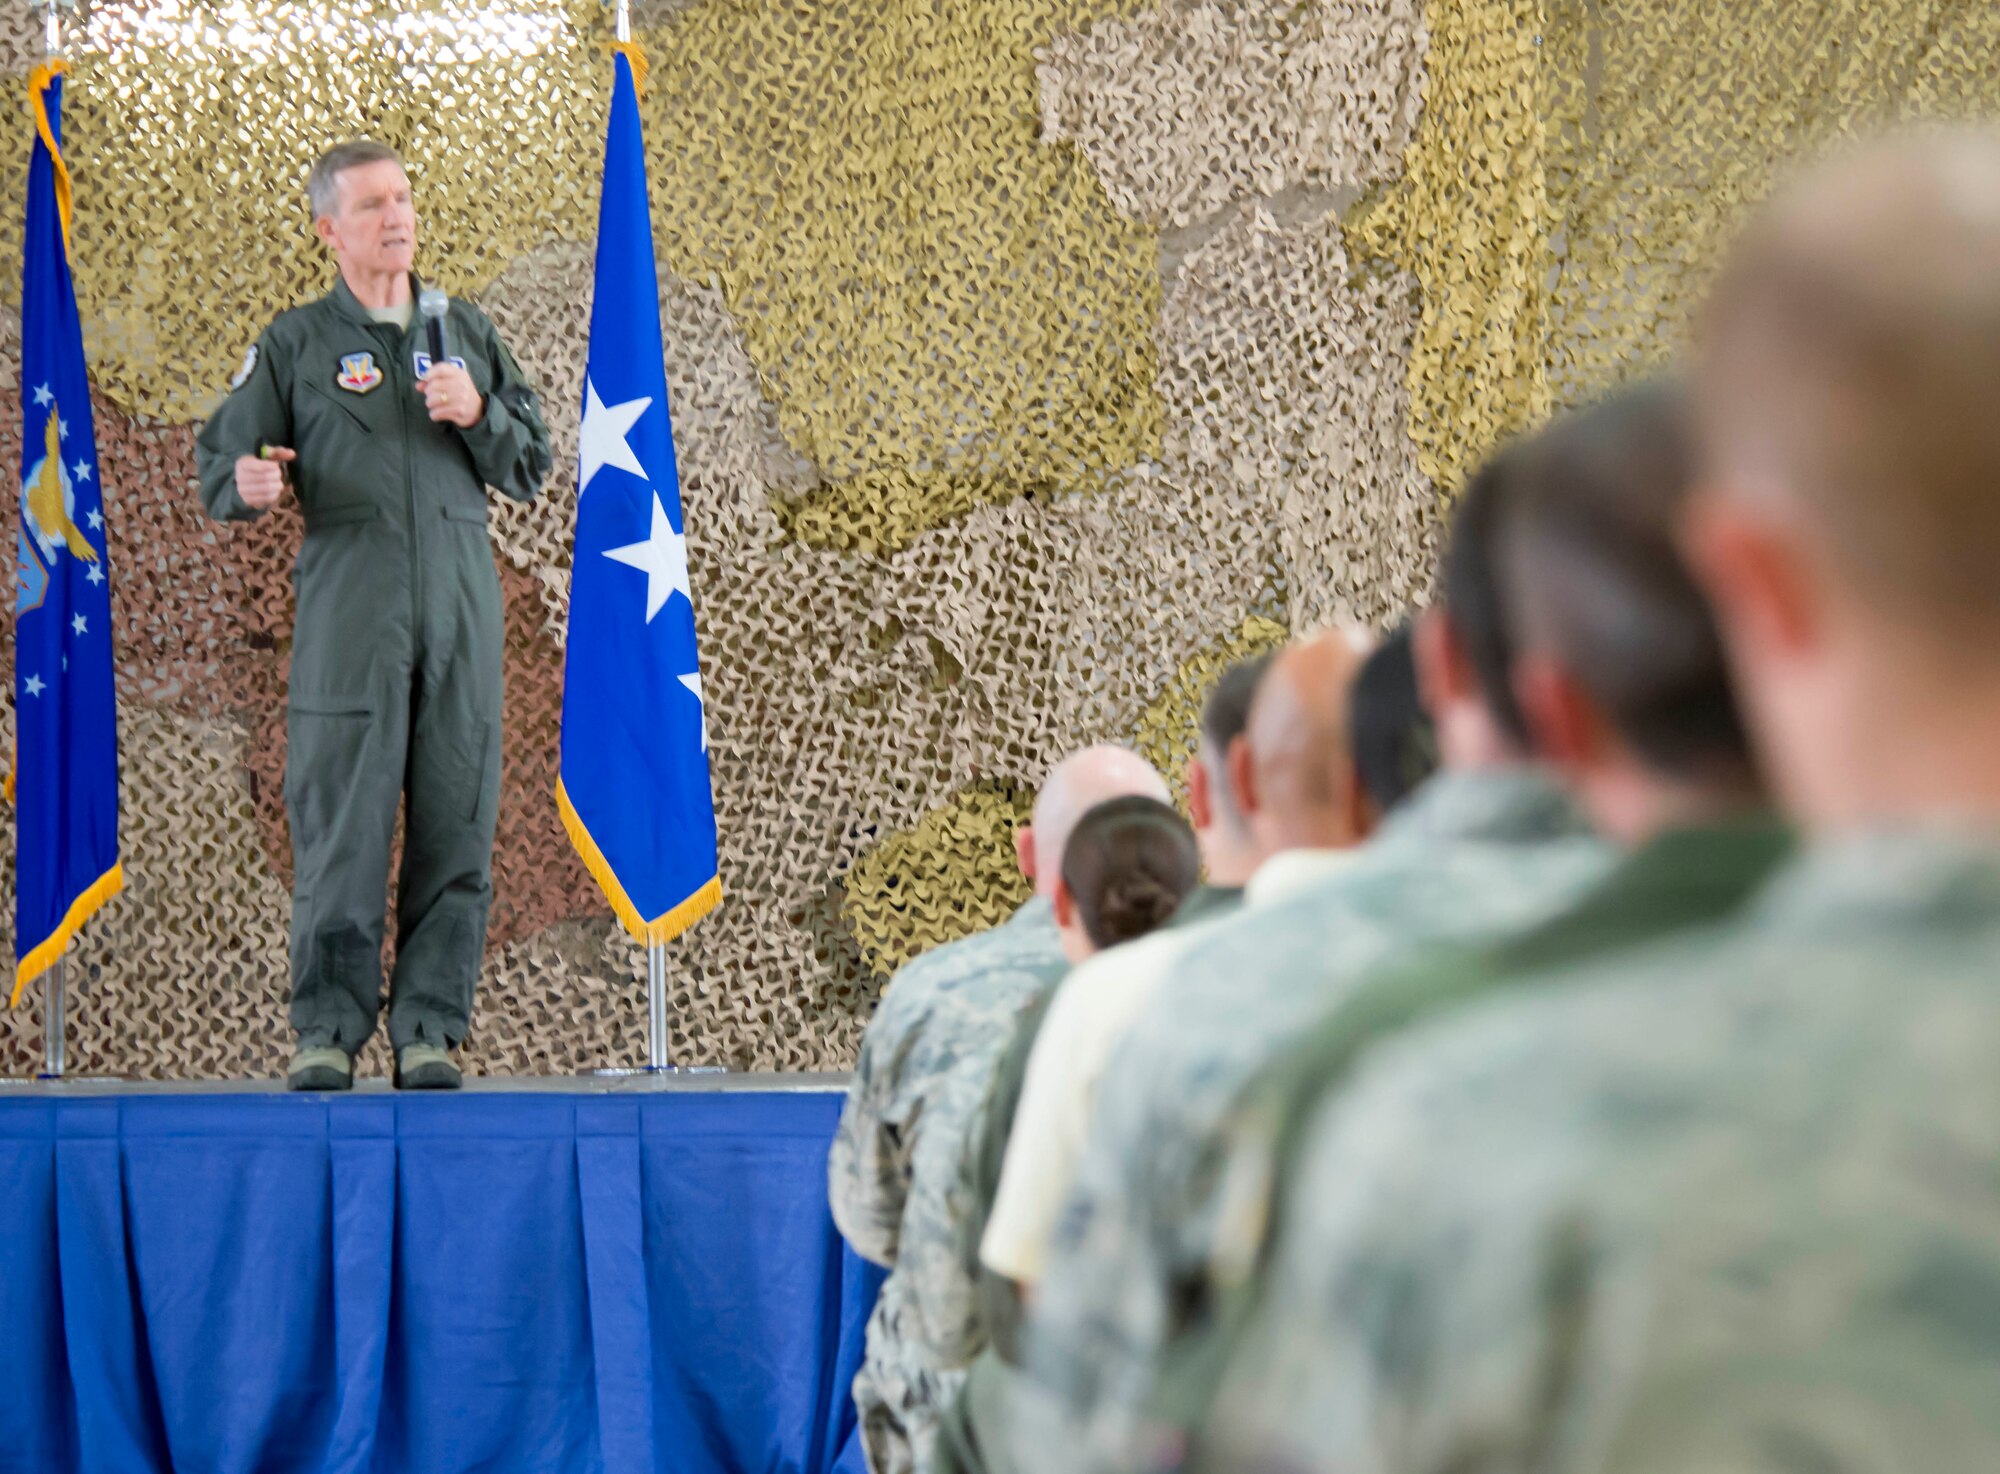 Gen. Hawk Carlisle, the commander of Air Combat Command, answers questions during an all-call Aug. 8, 2016, at Holloman Air Force Base, N.M. The discussions focused on upcoming changes at Holloman AFB and how those changes would affect the mission at the base. (U.S. Air Force photo by Airman 1st Class Randahl J. Jenson)